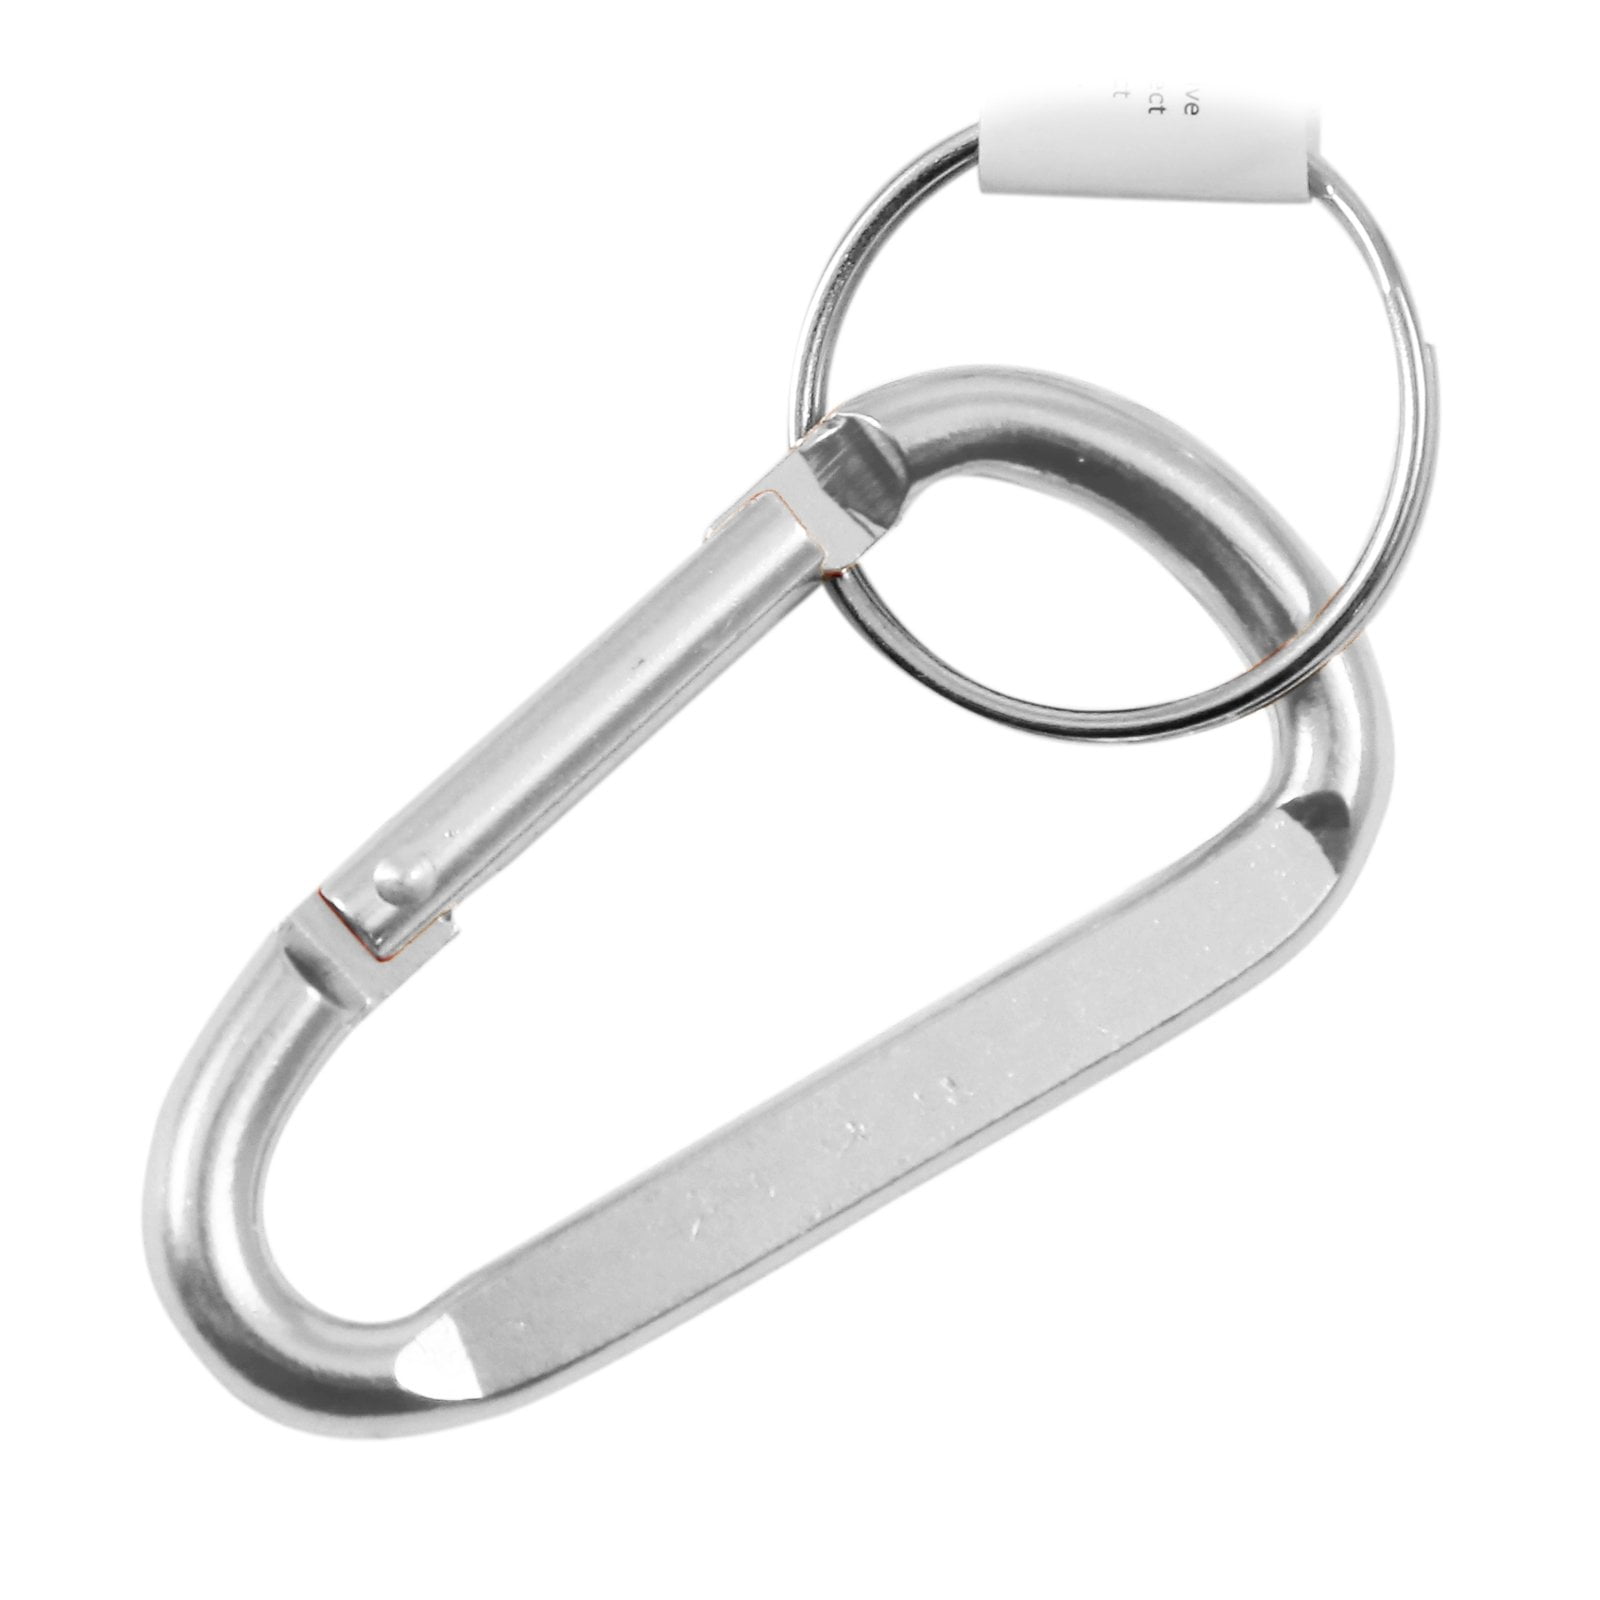 2pcs Keychains Mini Spring Portable Carabiner for Outdoor Climbing Silver 